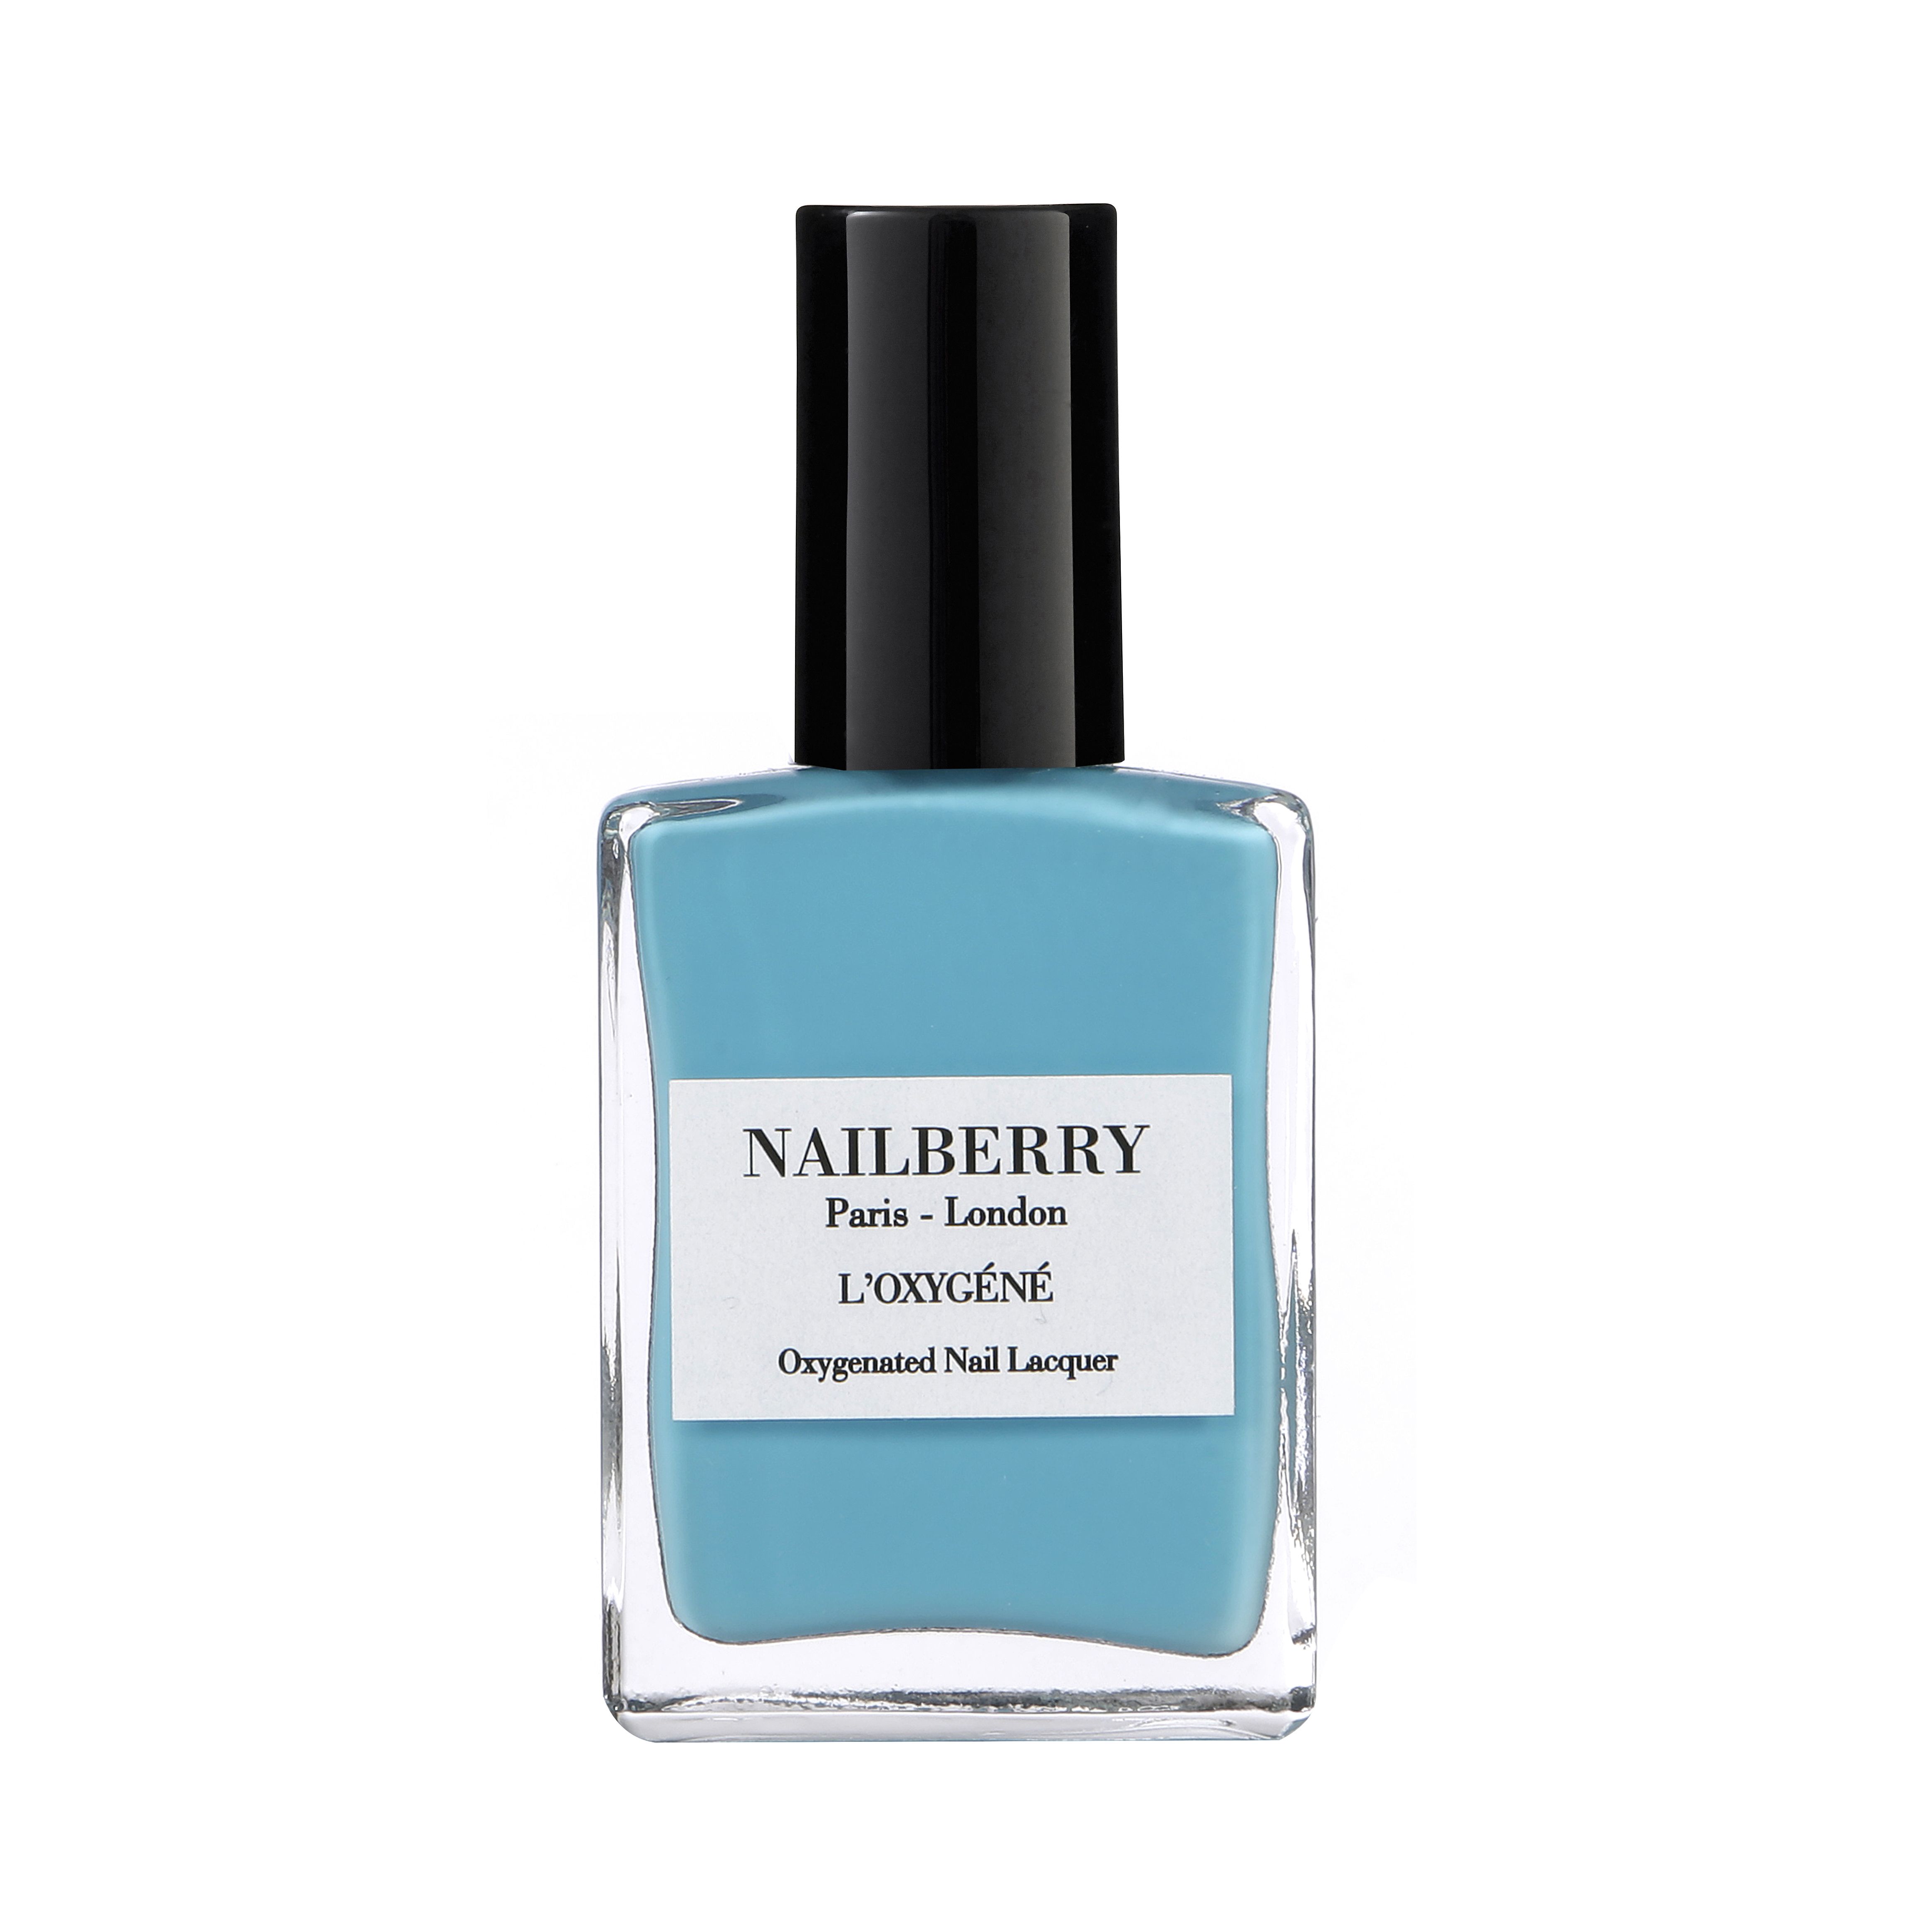 Santorini Oxygenated Nail Lacquer | Space NK - UK